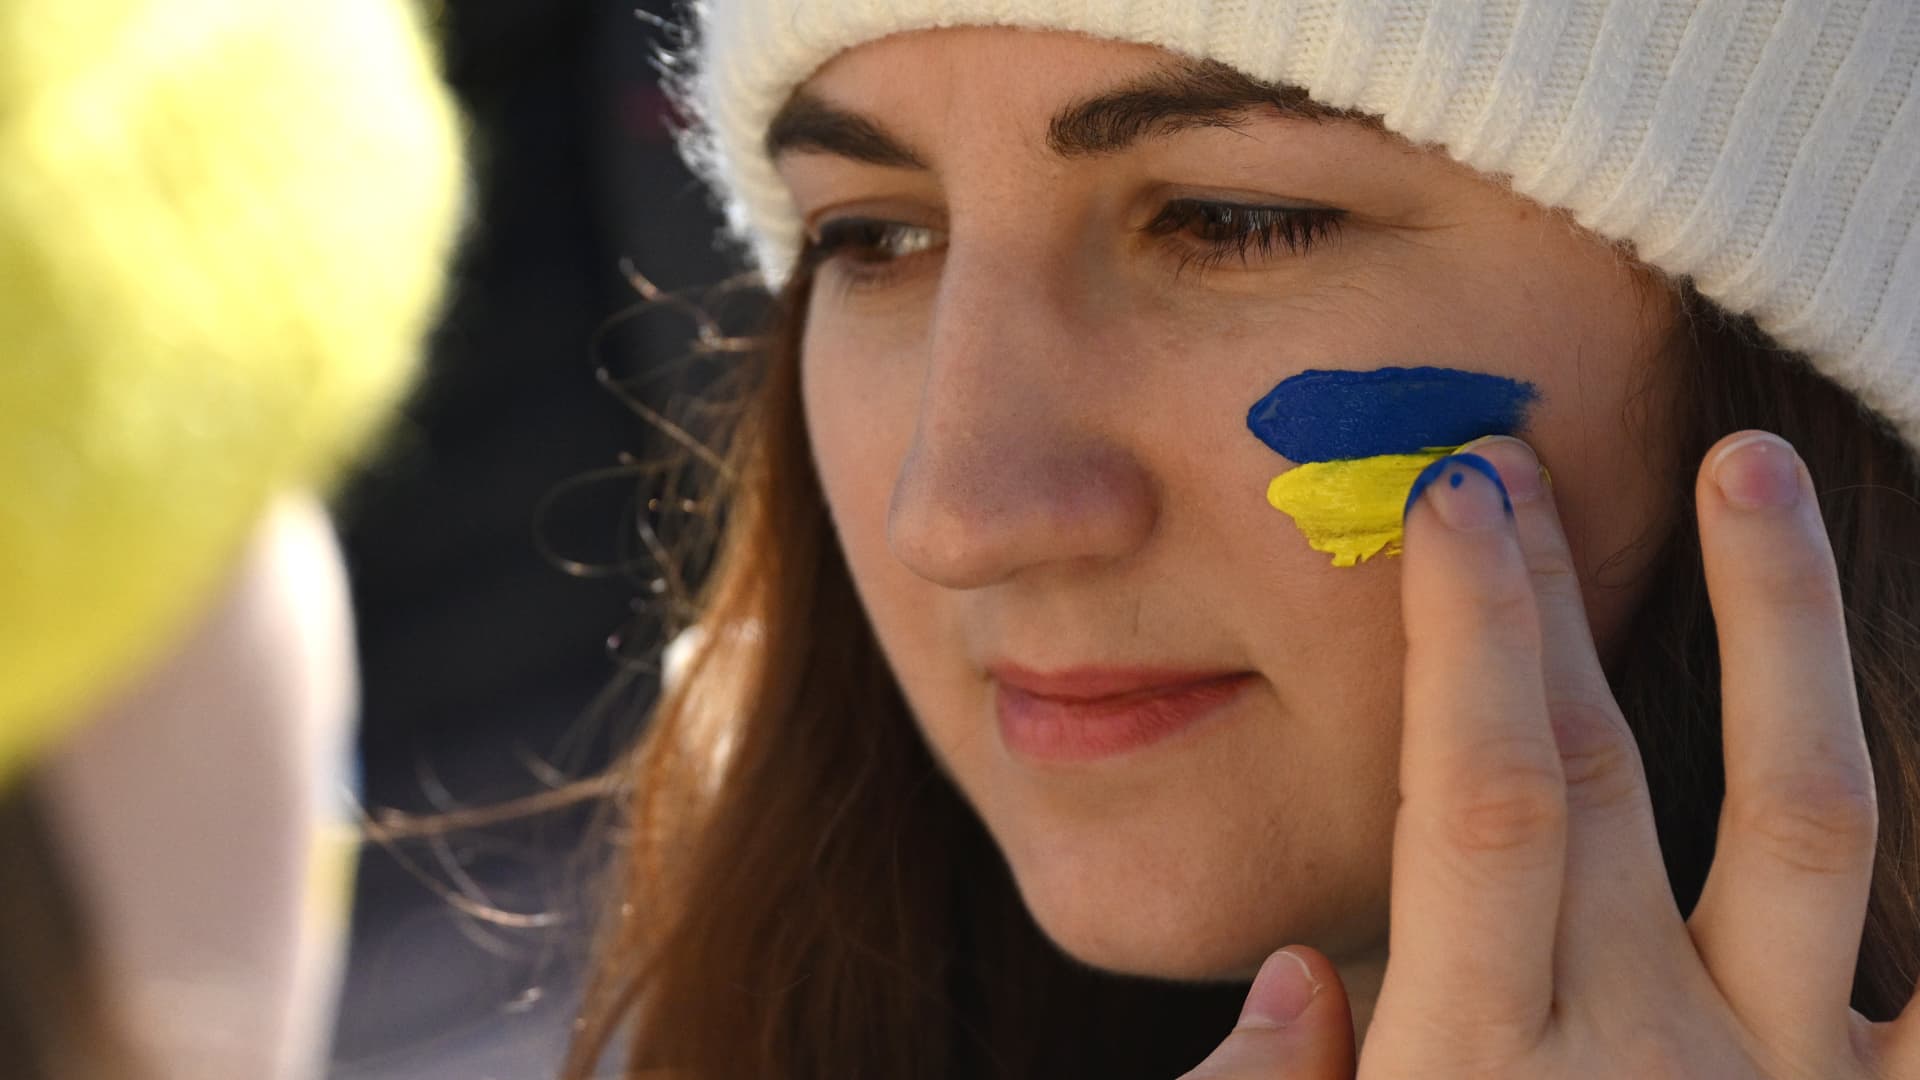 A protester finger paints a Ukrainian flag on another protester's face during a demonstration in support of Ukraine in Trafalgar Square on February 27, 2022 in London, England.